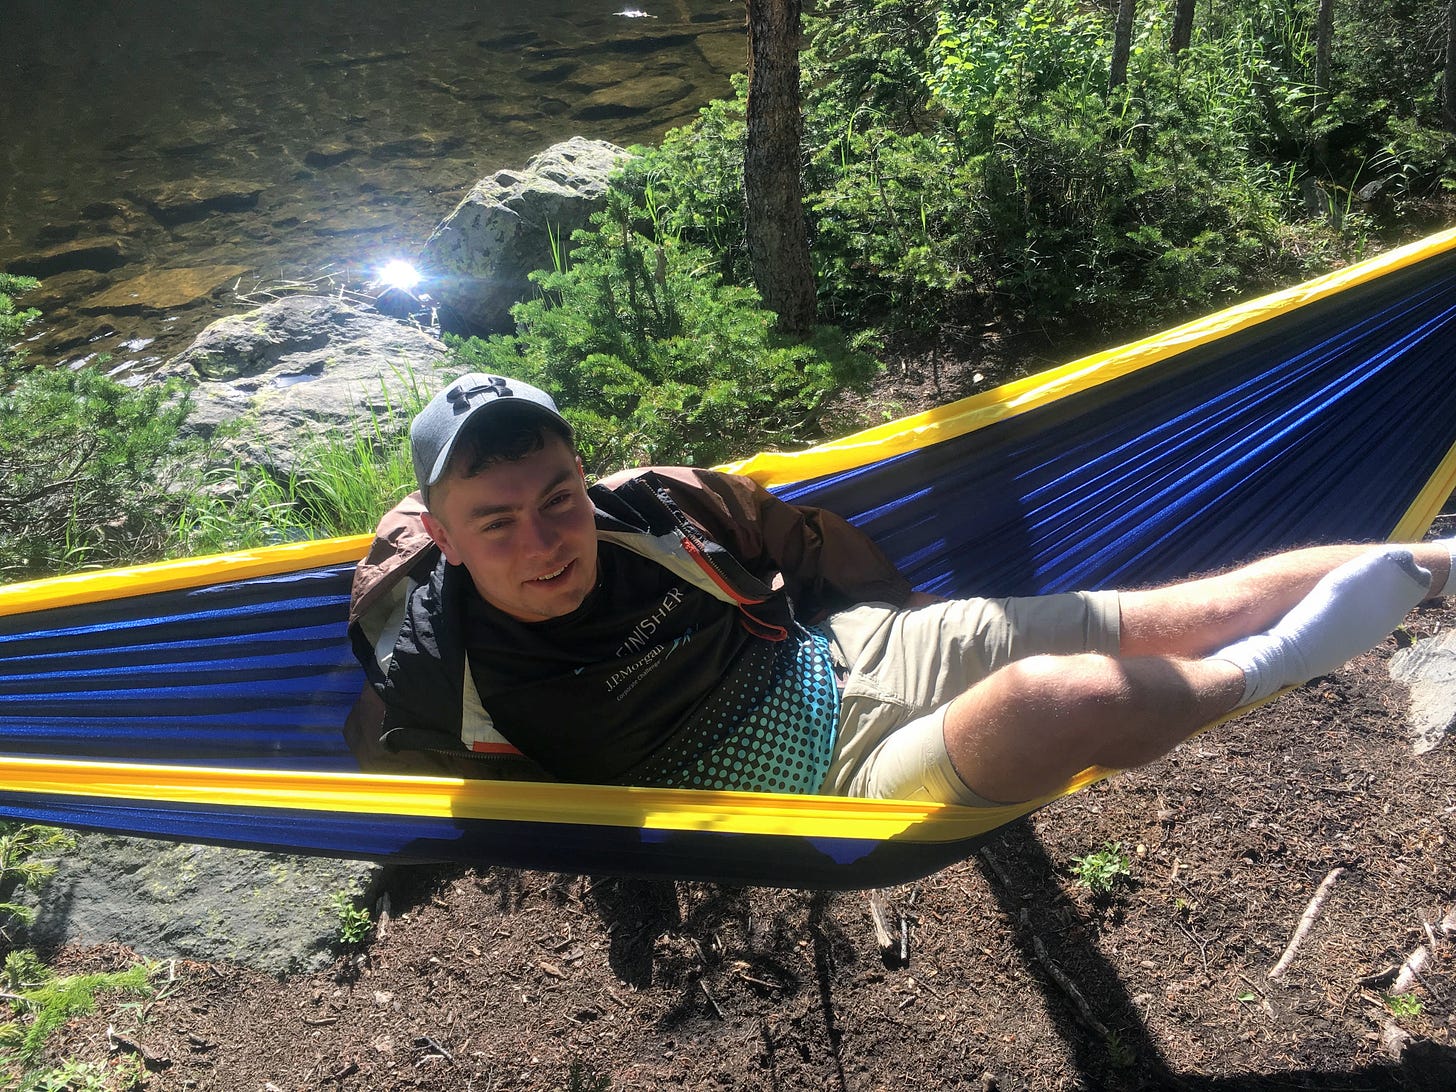 Me, lounging in a blue and yellow hammock by the side of a mountain lake